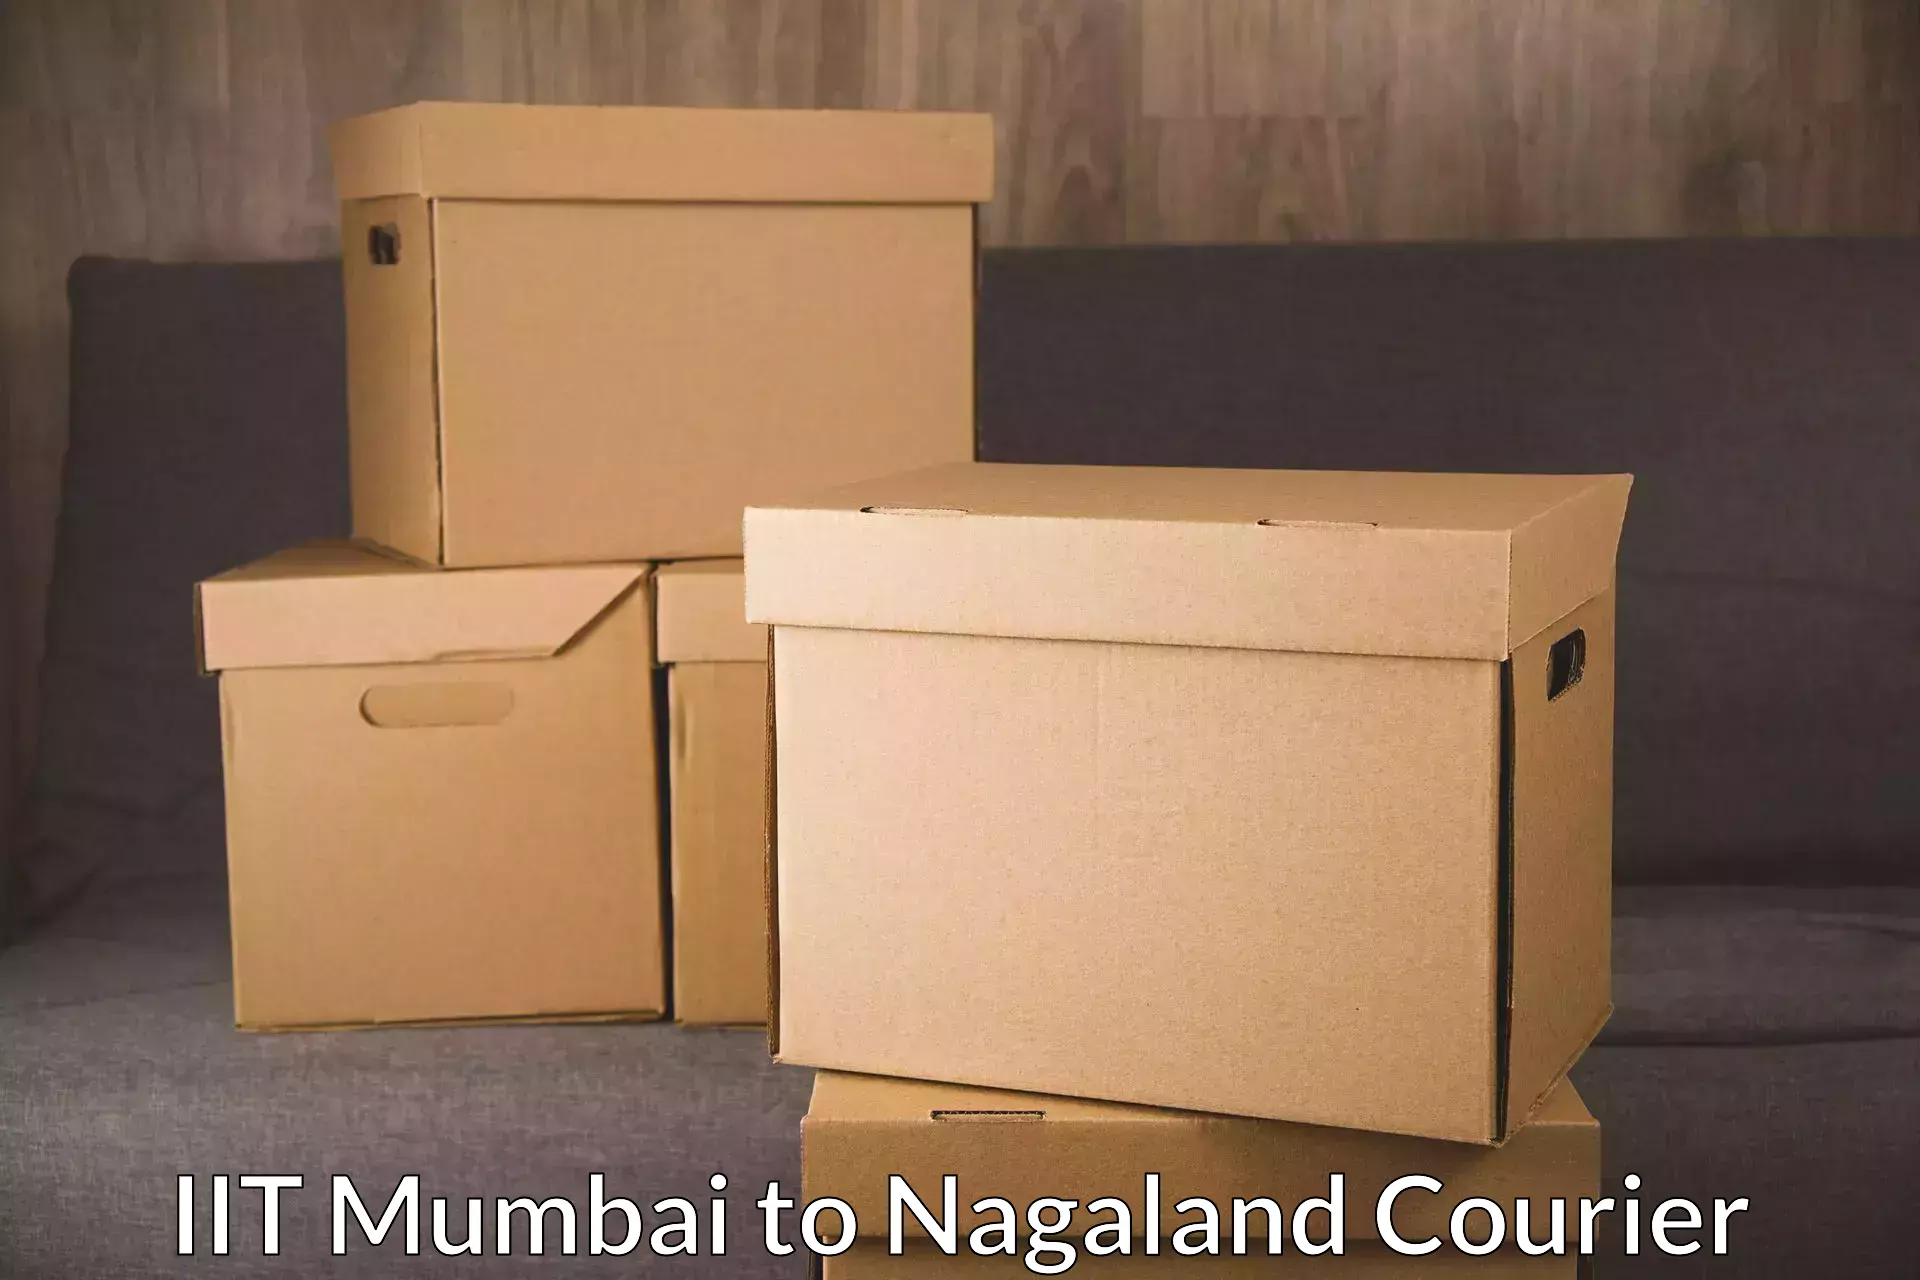 Modern delivery methods in IIT Mumbai to Nagaland